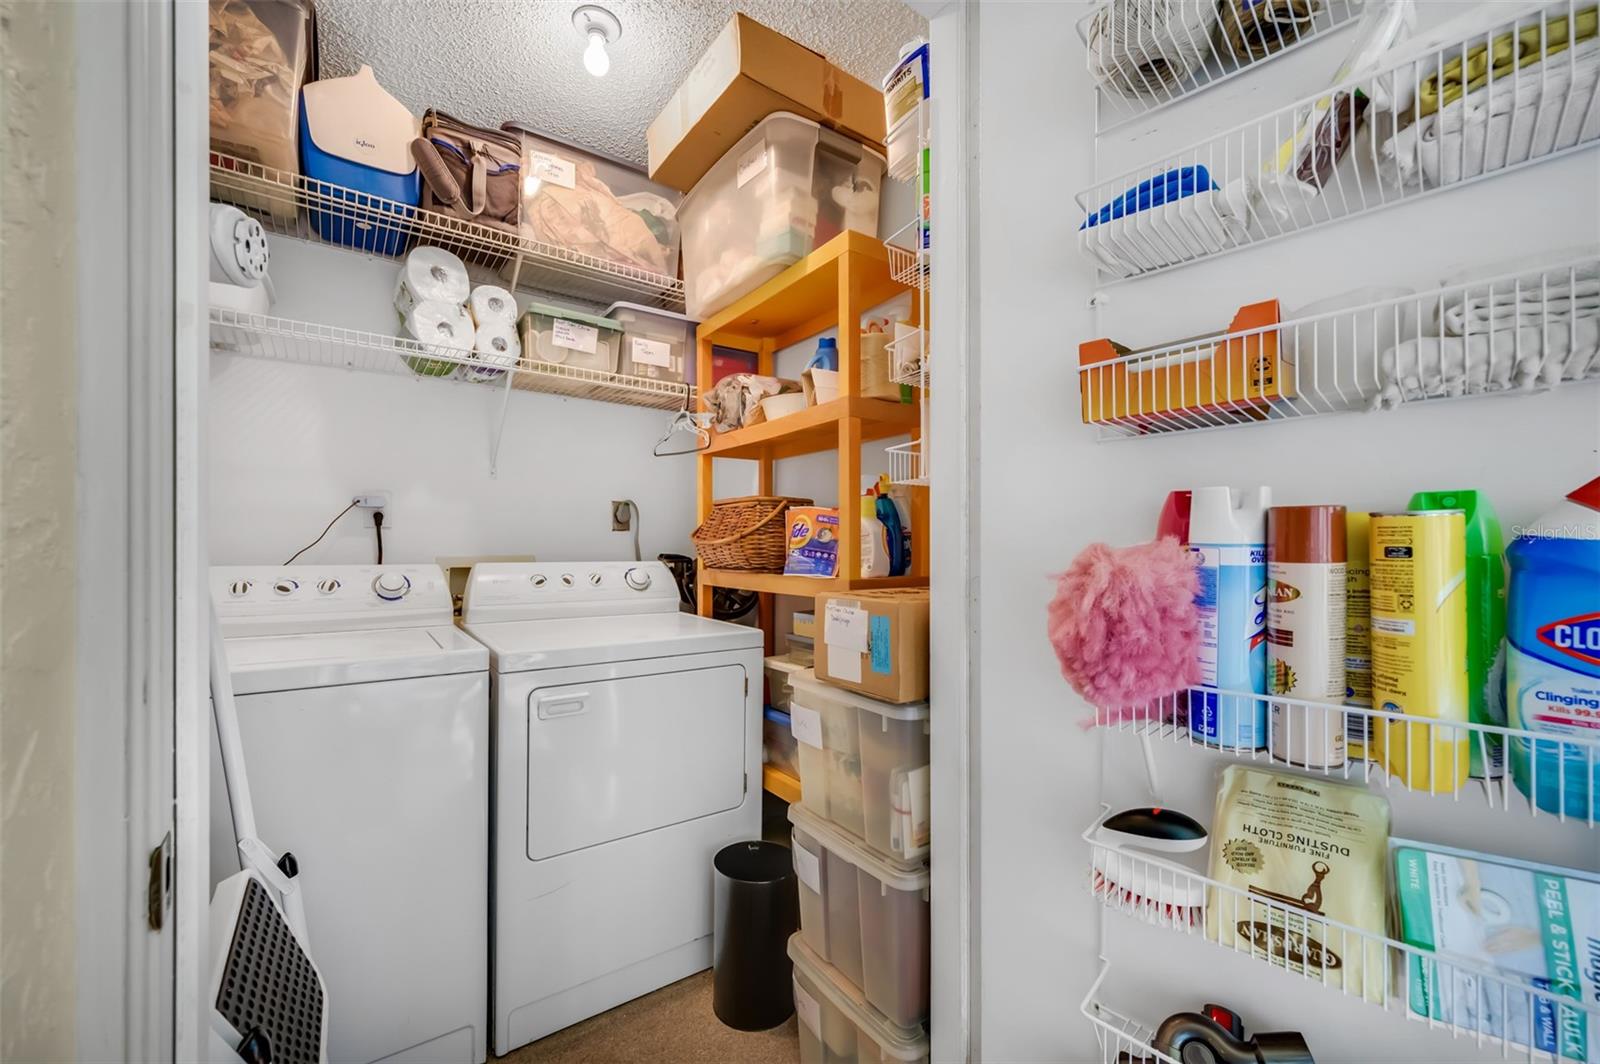 Laundry room includes full size washer and